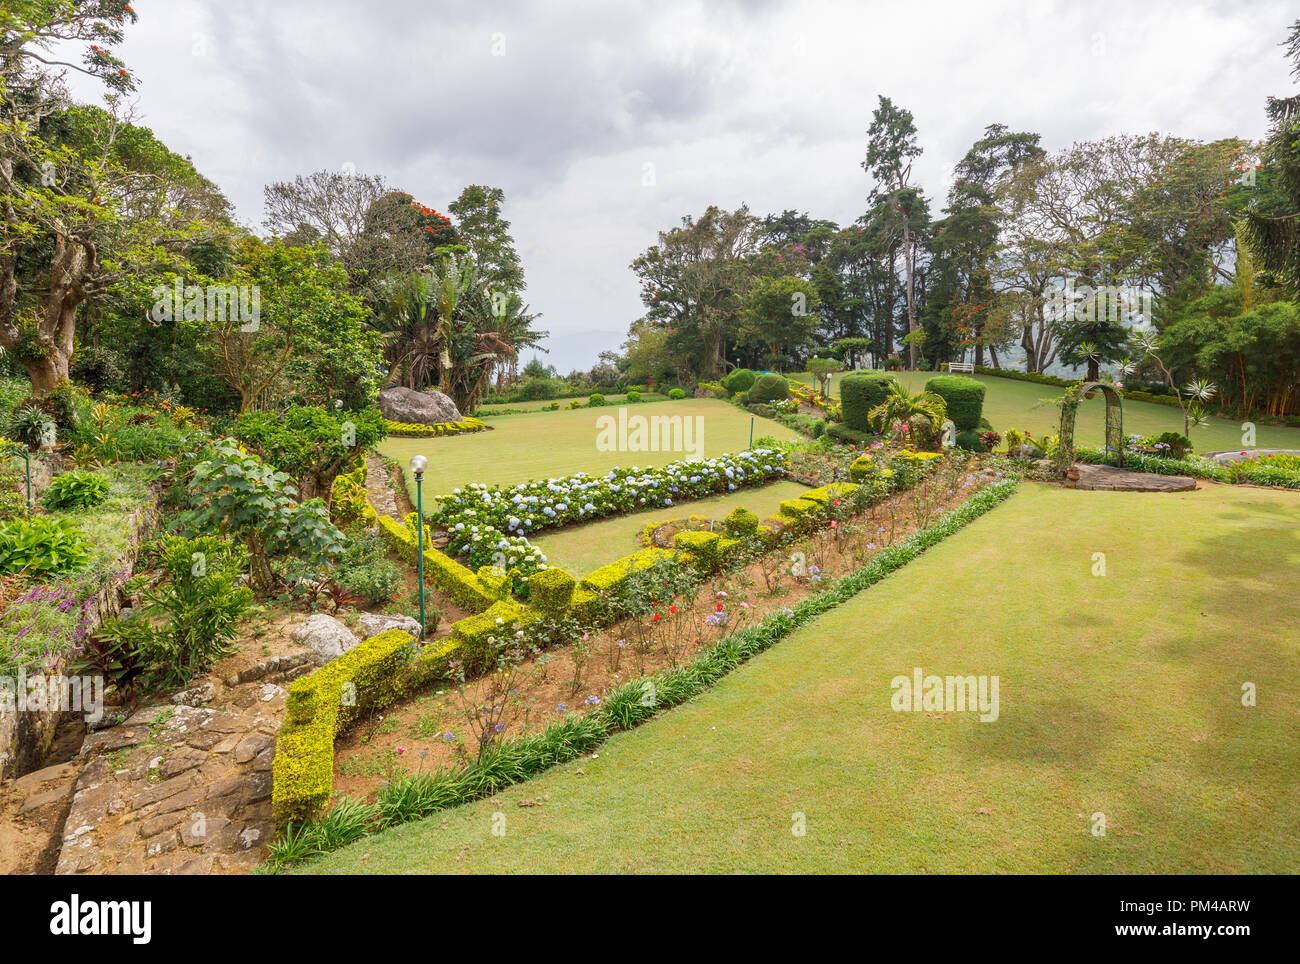 Dambatenne Group, Lipton's Bungalow (General Manager;s Building) landscaped gardens, Haputale hill country tea growing region, Uva District, Sri Lanka Stock Photo